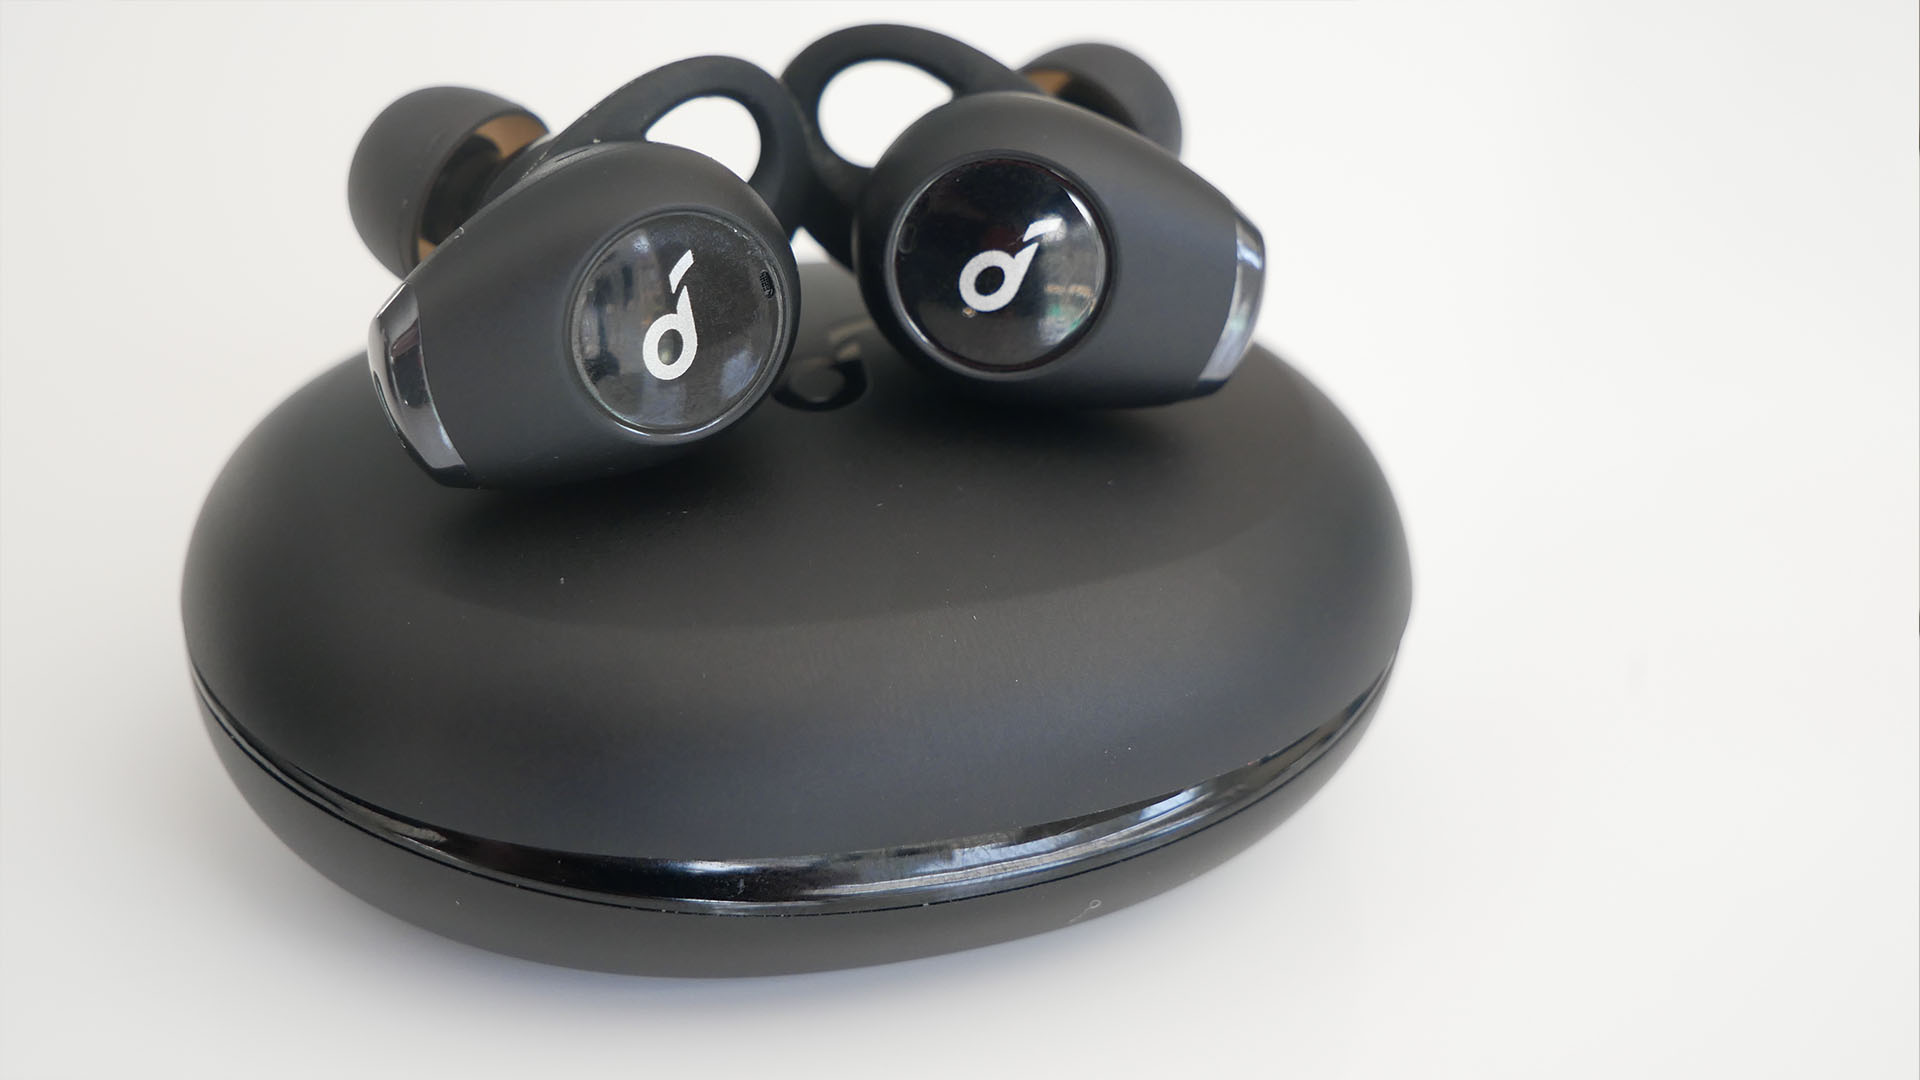 Image of Life Dot earbuds from Soundcore